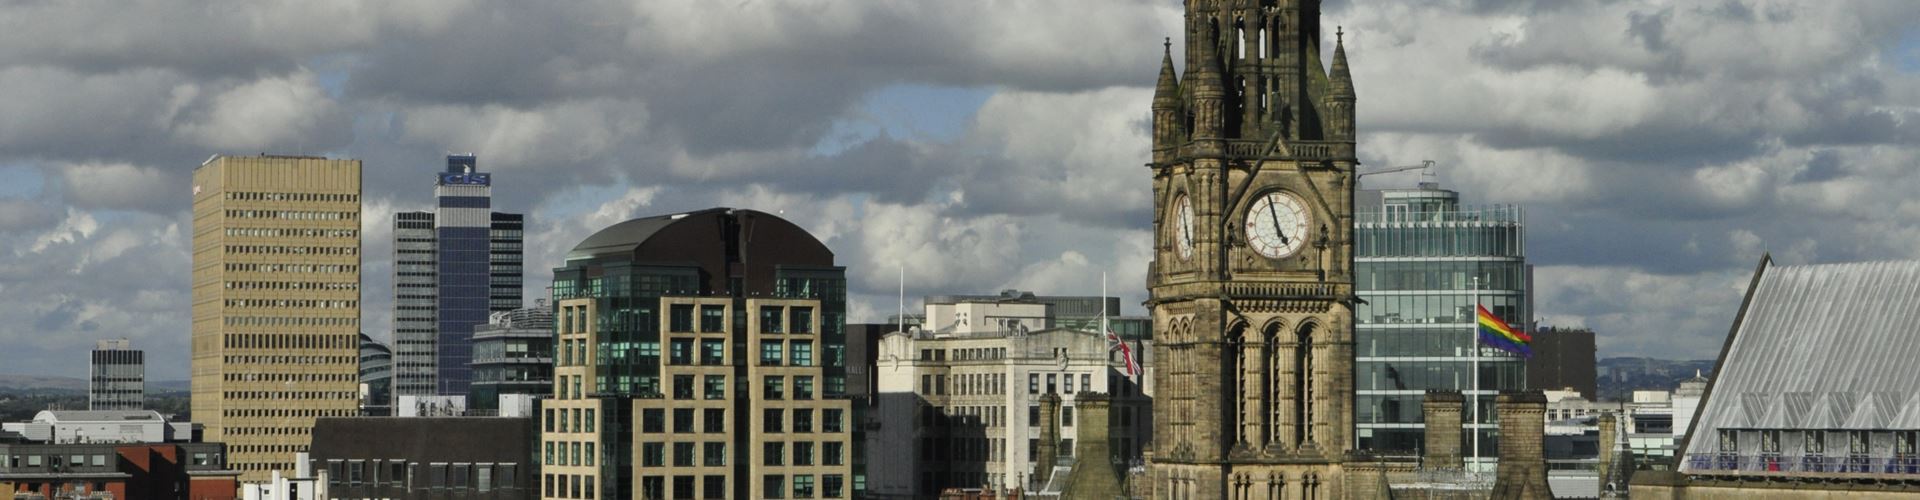 Manchester received over £136m in European funding, says research